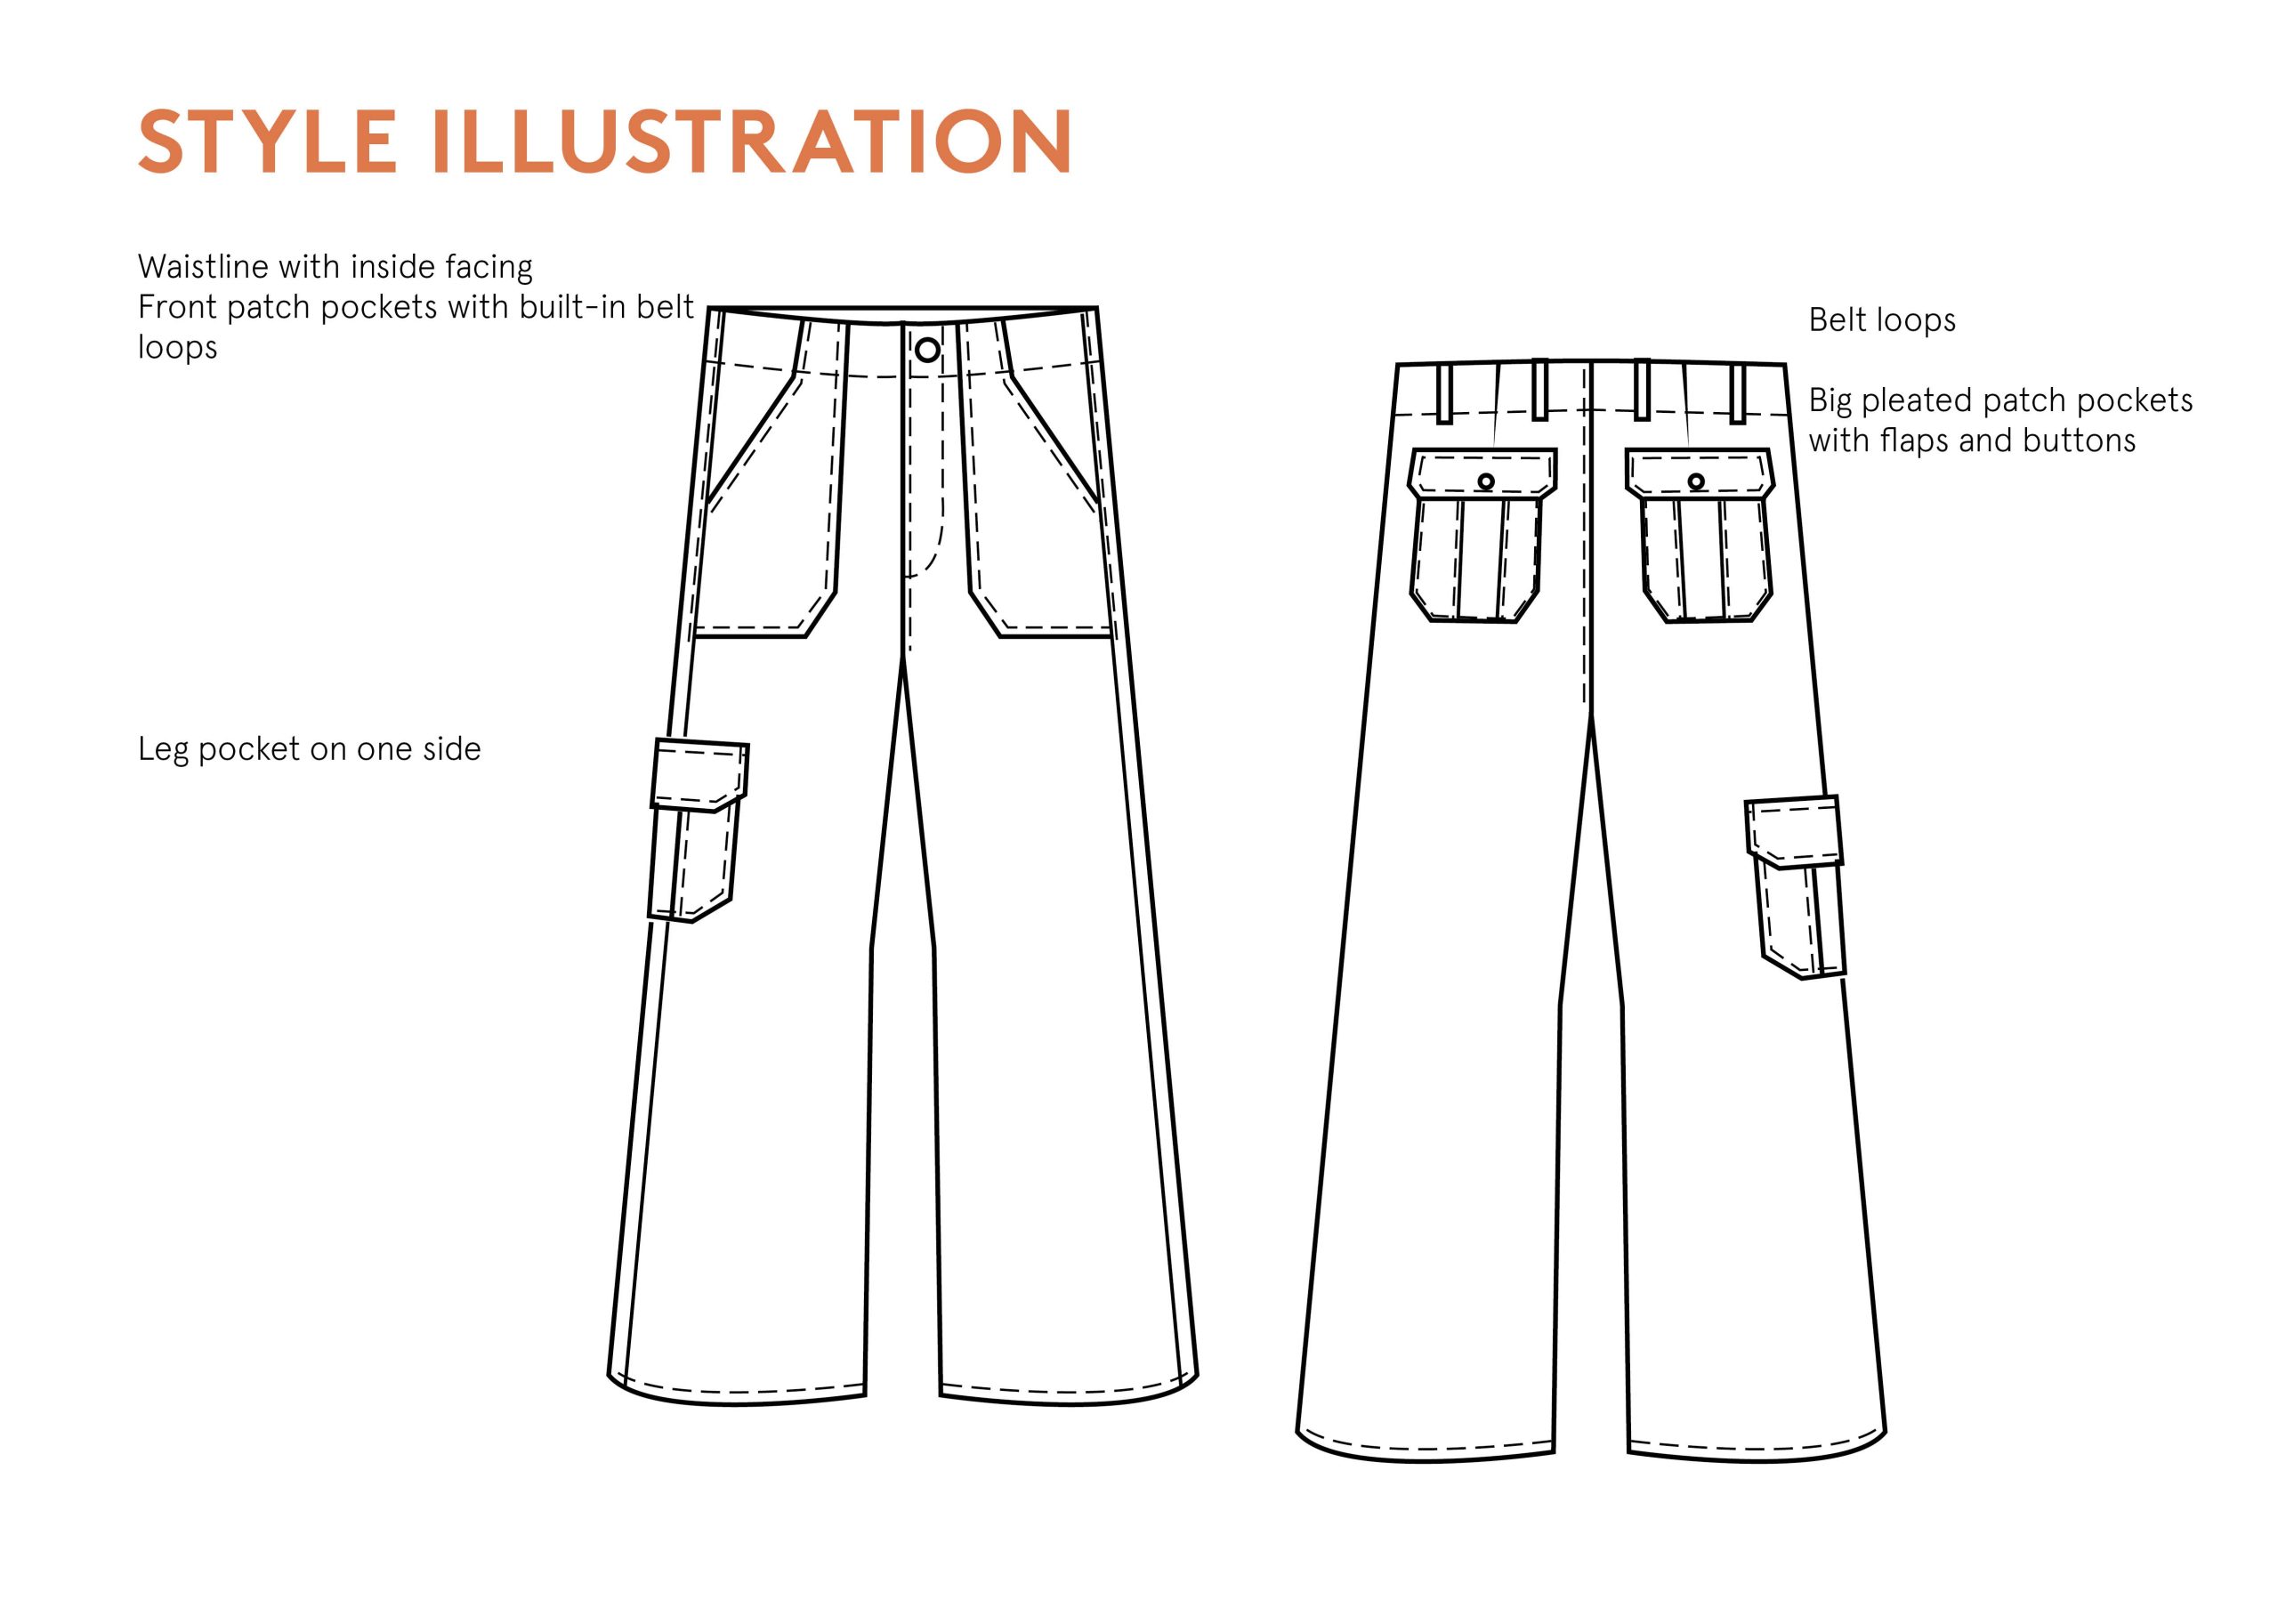 Cargo pants sewing pattern  Wardrobe By Me - We love sewing!